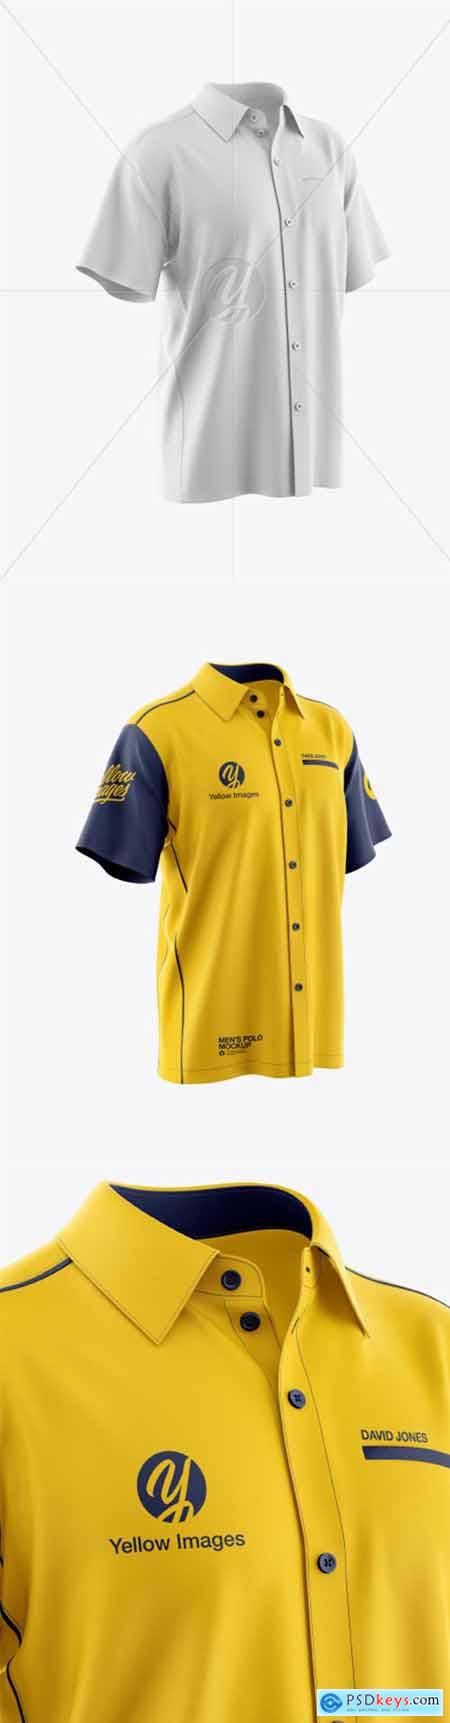 Download Men S Polo Mockup 37413 Free Download Photoshop Vector Stock Image Via Torrent Zippyshare From Psdkeys Com Yellowimages Mockups